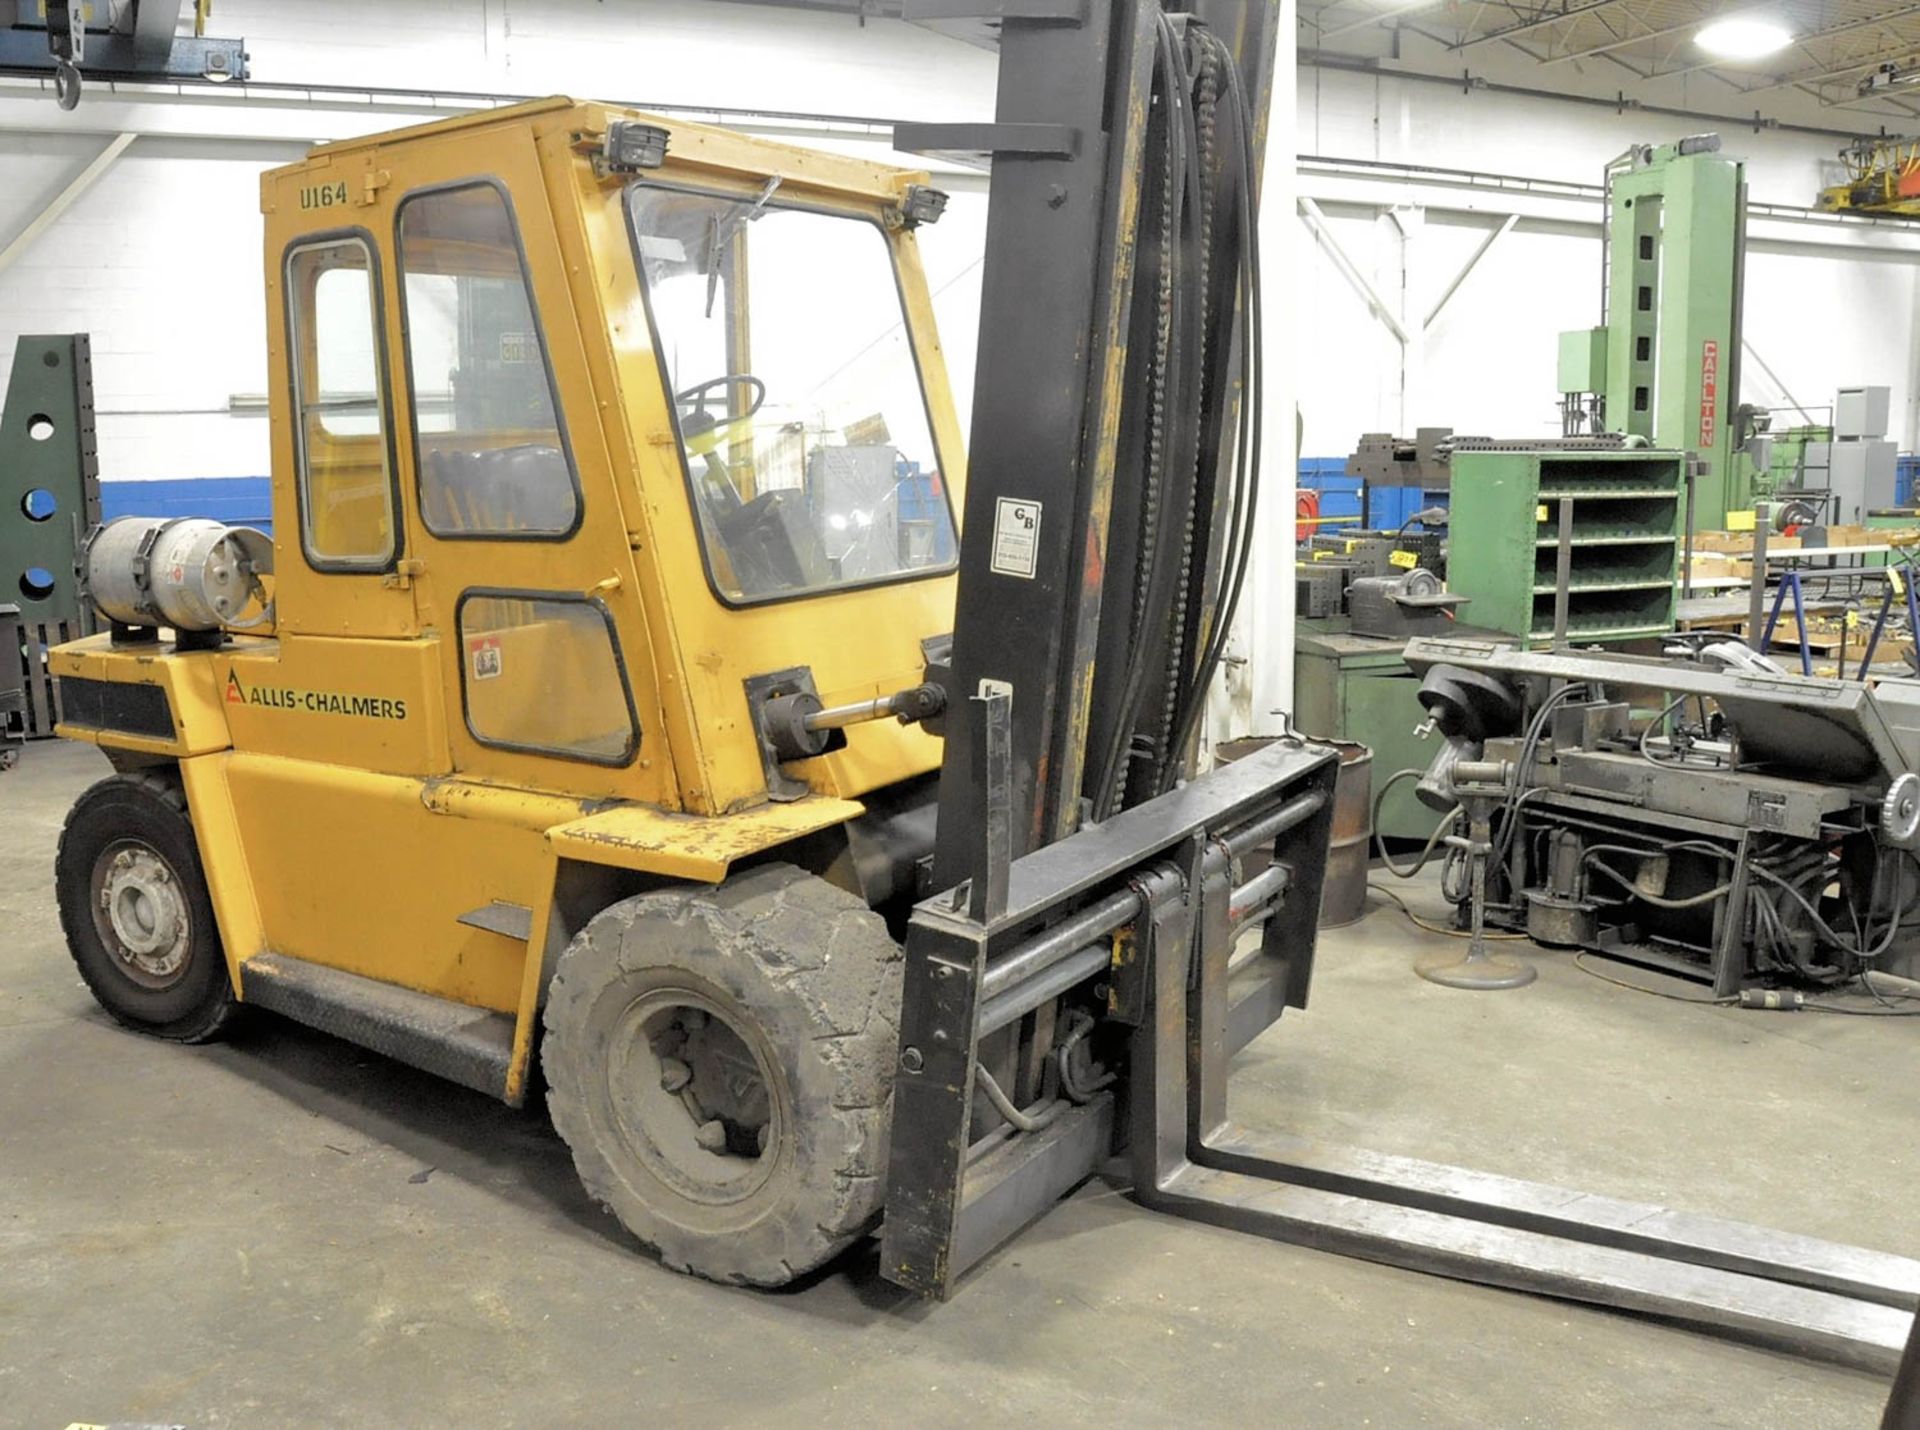 Allis Chalmers Mdl. ACP-150PS-SNGL Forklift Truck, 15,000 Lbs. x 144" Lift Capacity, LP Gas Powered, - Image 3 of 5